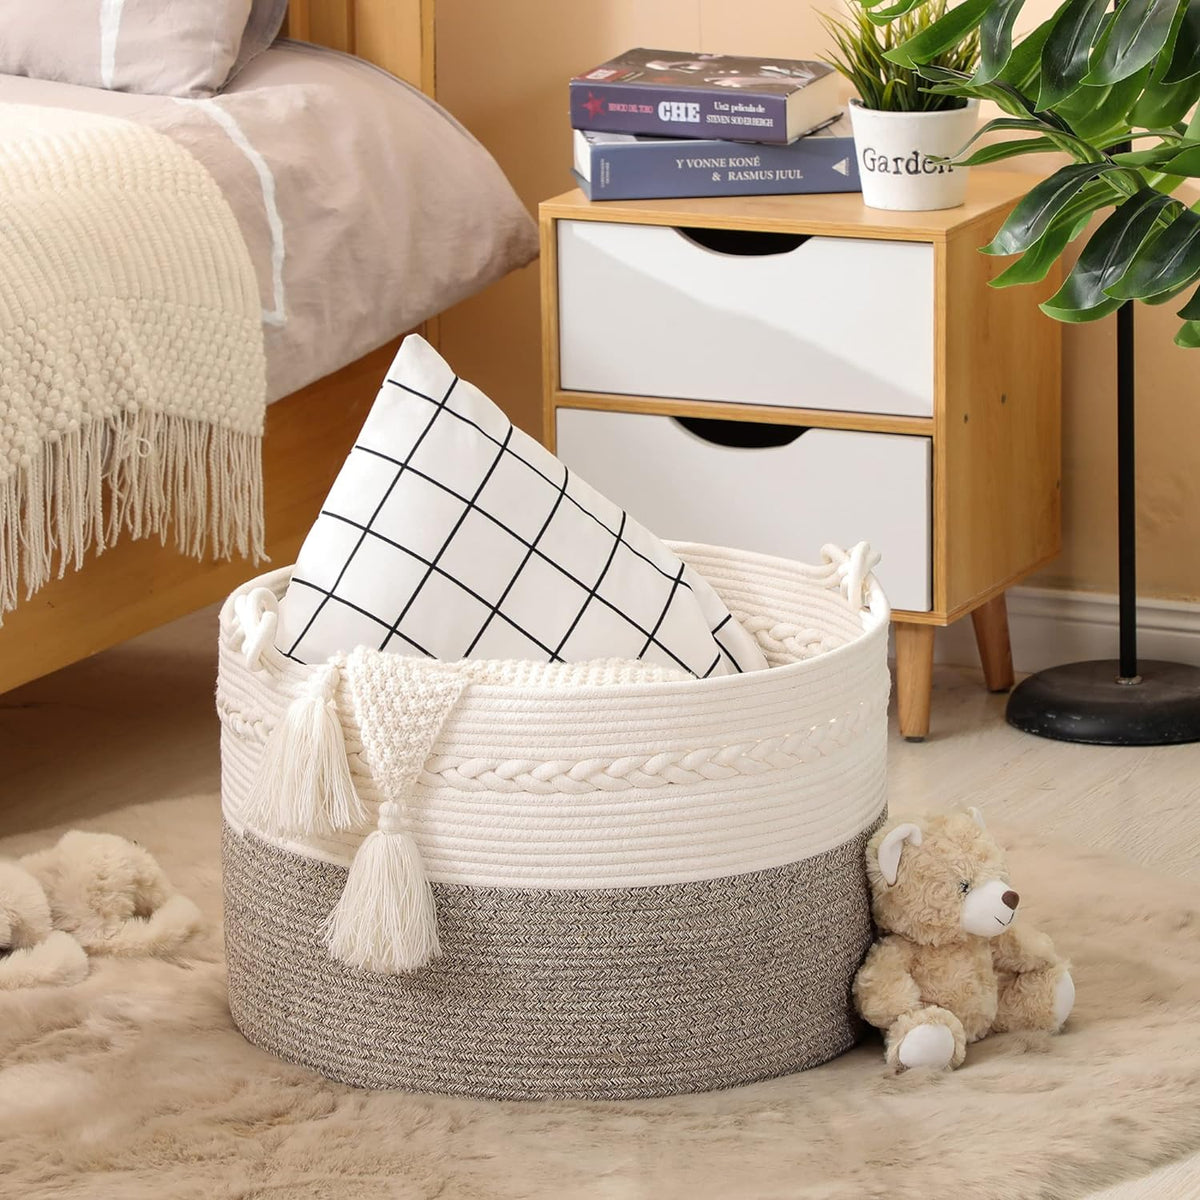 Large Blanket Basket (20"x13"),Woven Baskets for storage Baby Laundry Hamper, Cotton Rope Blanket Basket for Living Room, Laundry, Nursery, Pillows, Baby Toy chest (White/Beige)